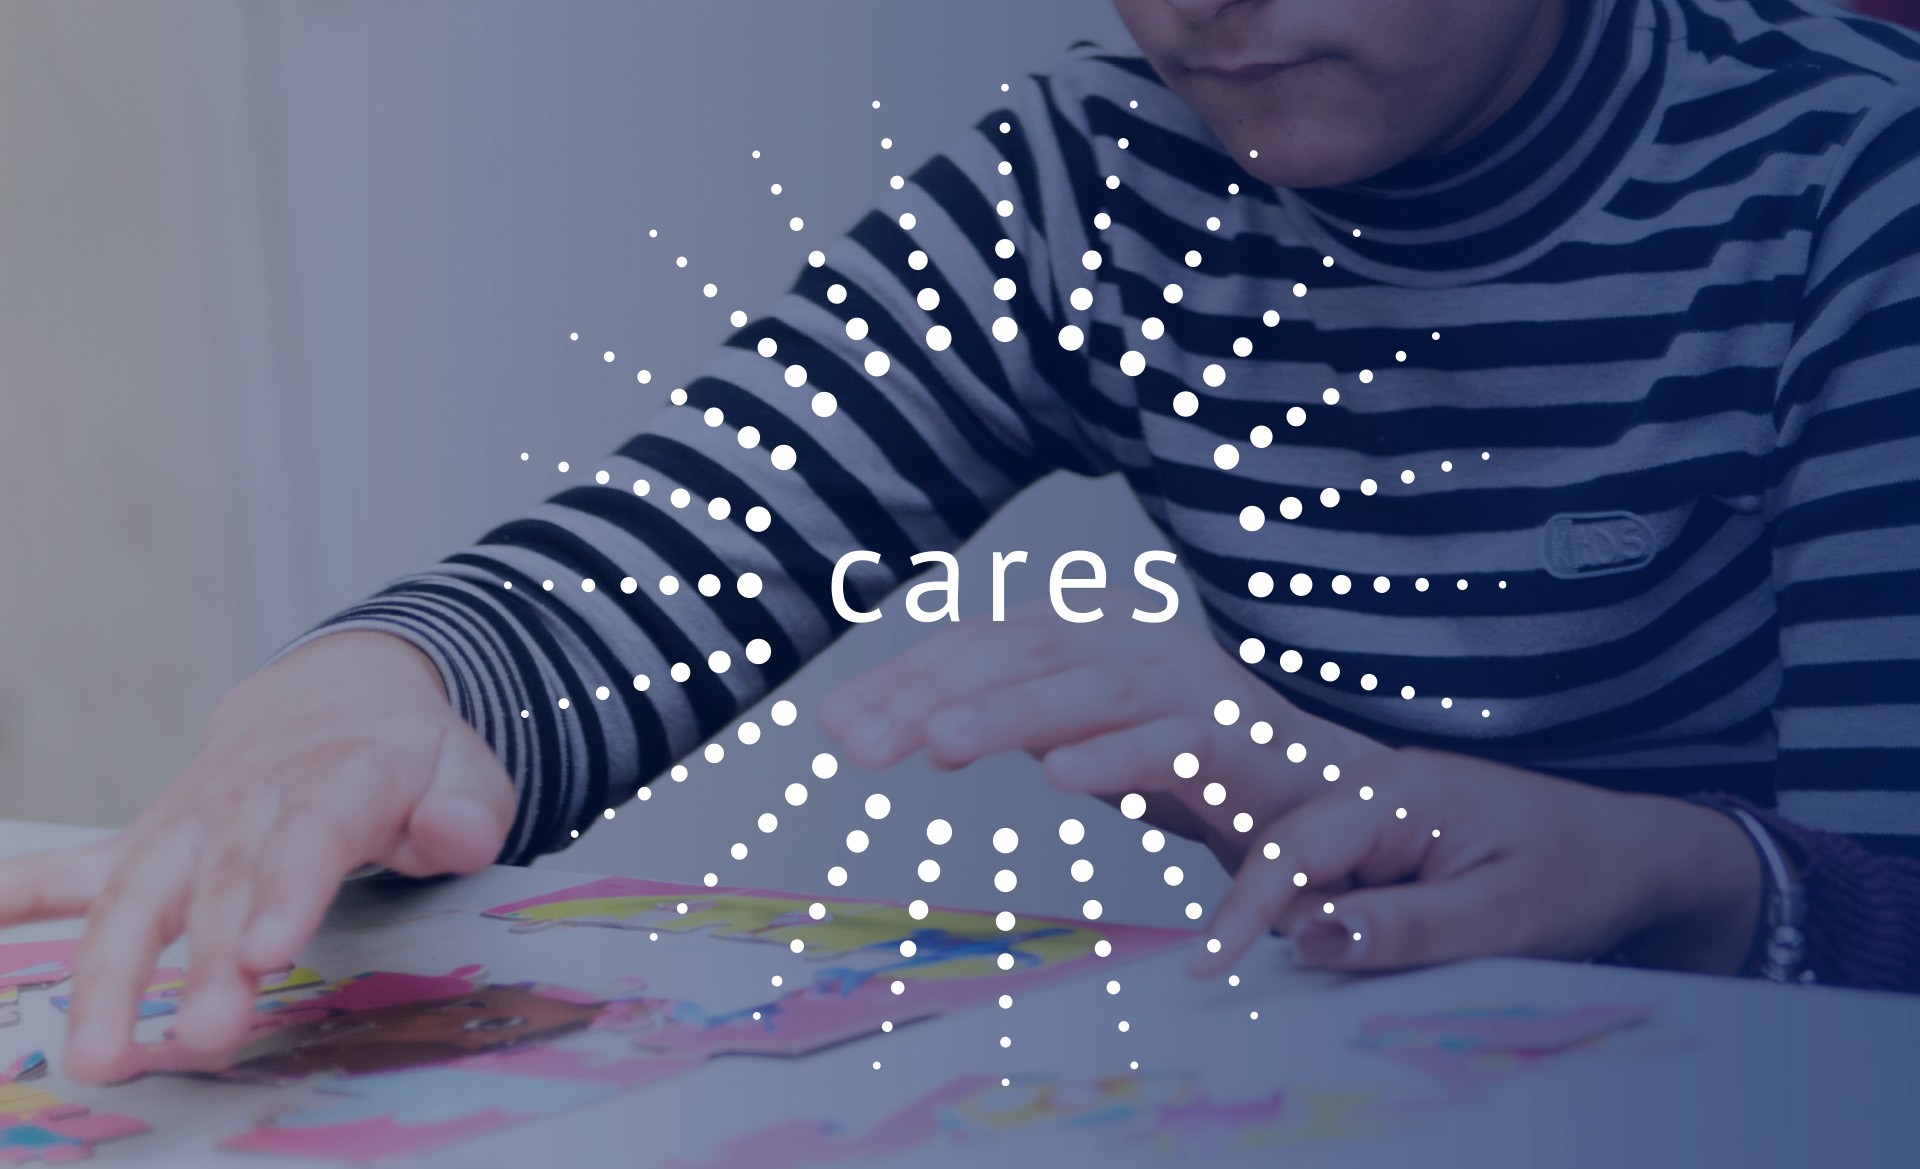 The CARES logo overlaid on a young person working at a table